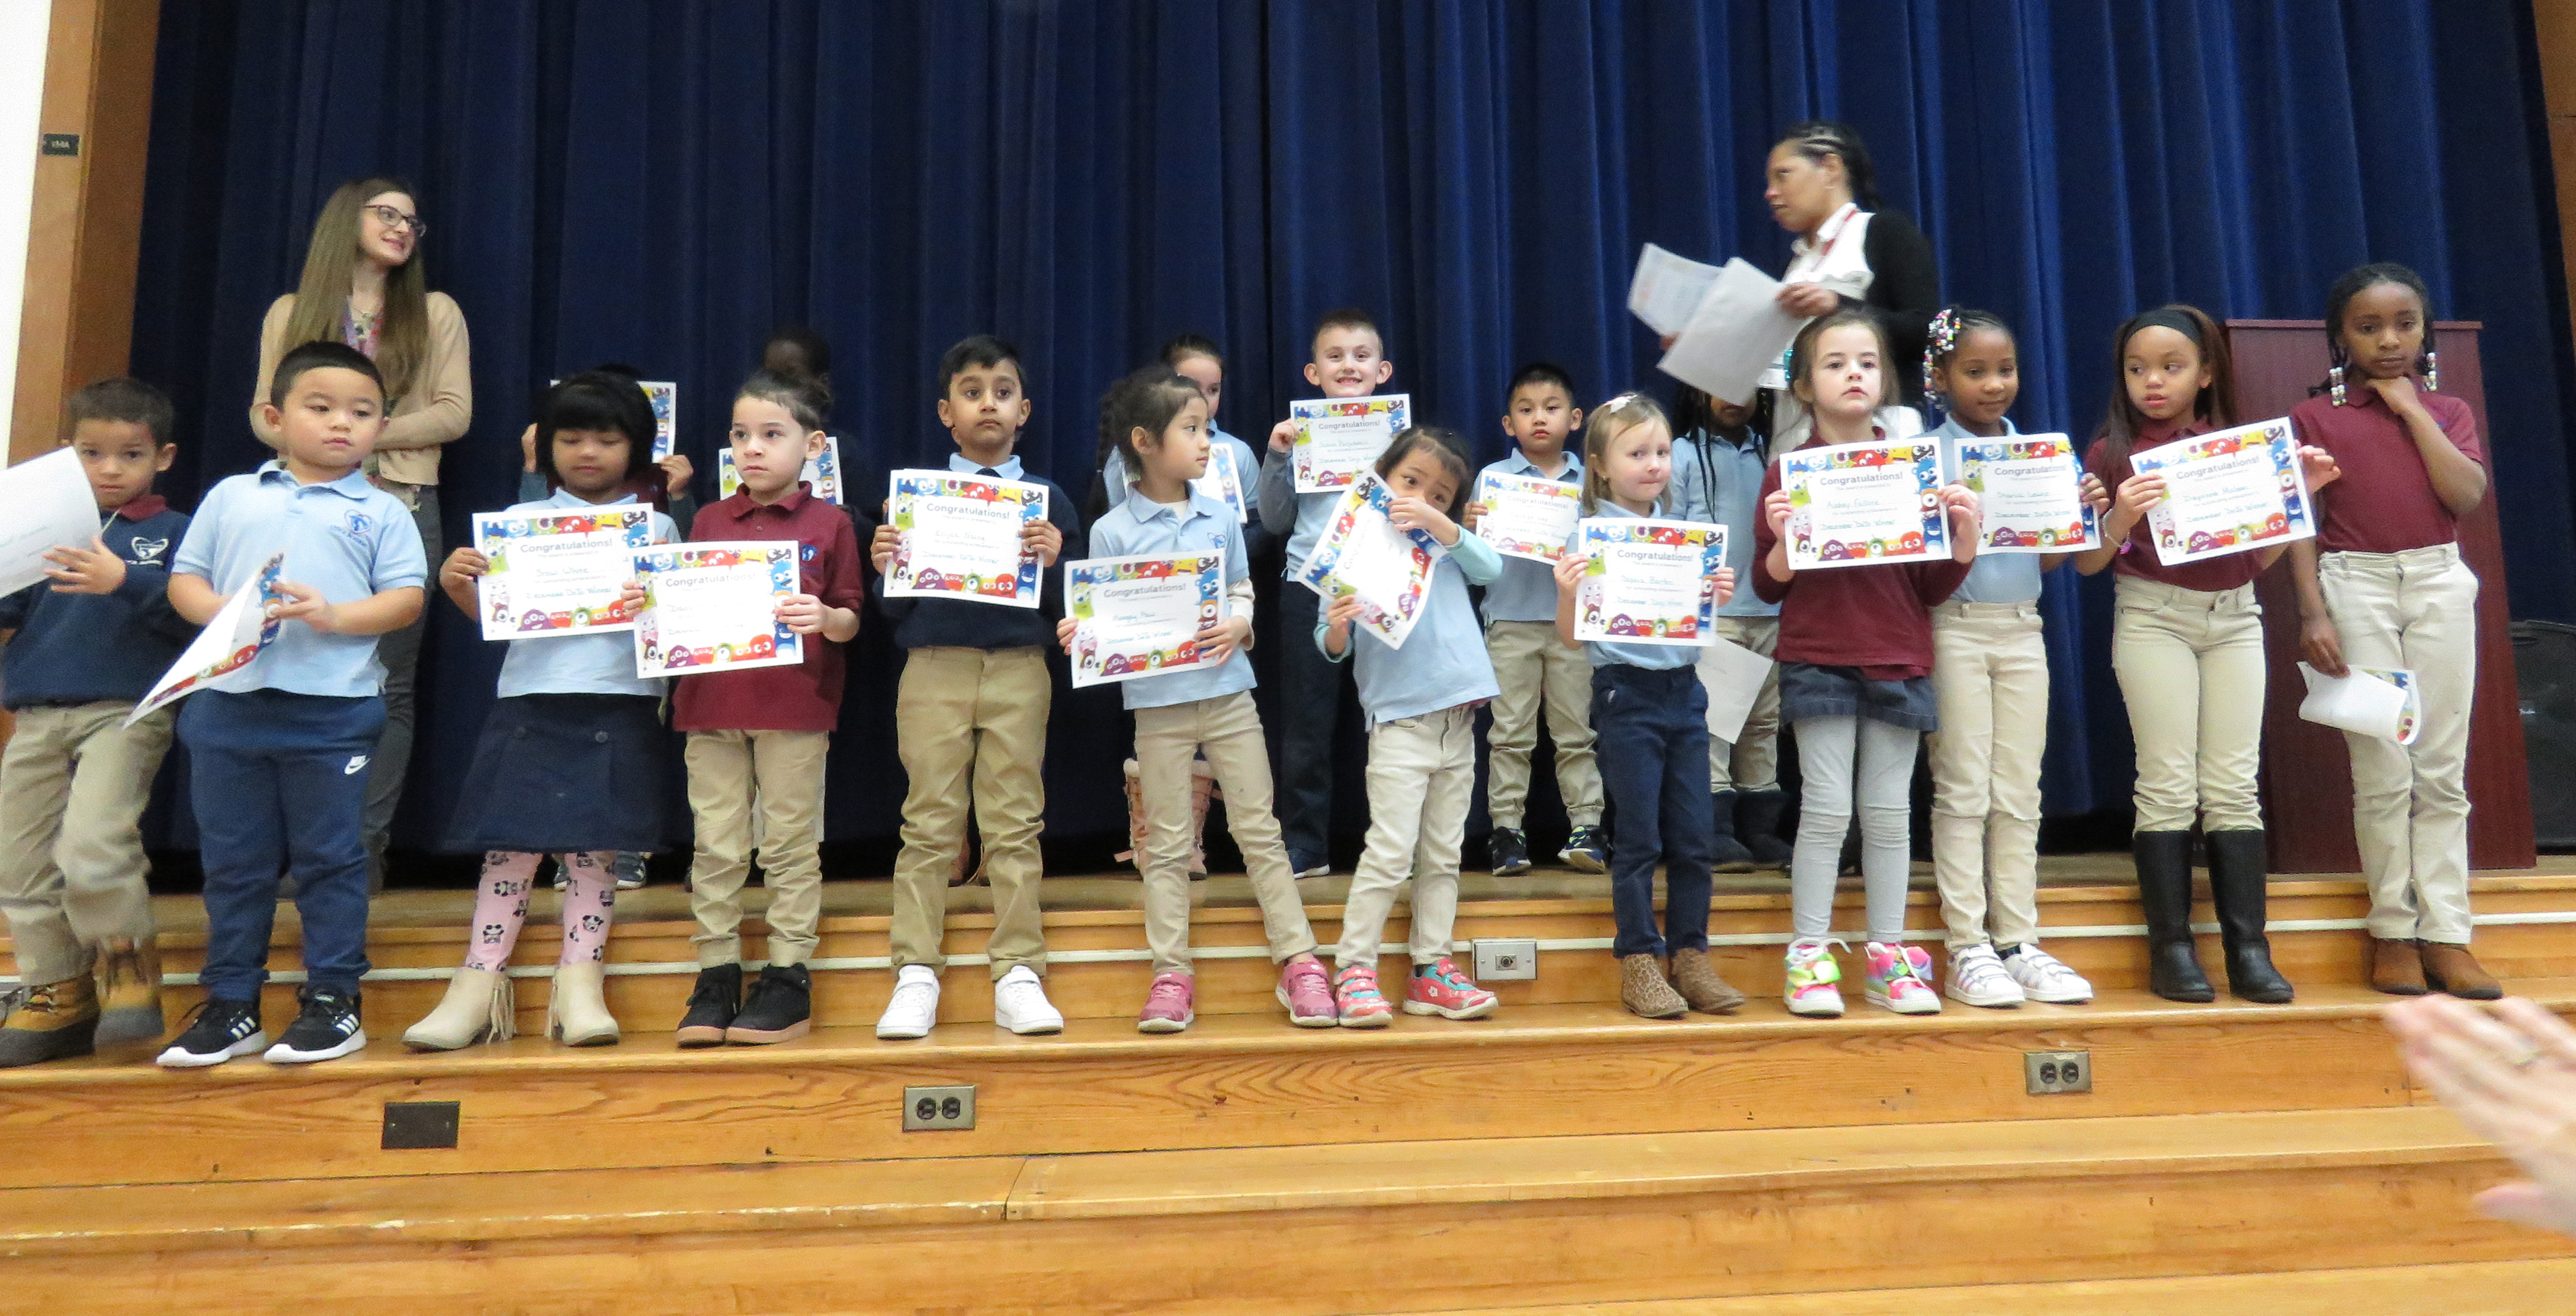 Utica Academy of Science Elementary School Celebrates January Student of the Month